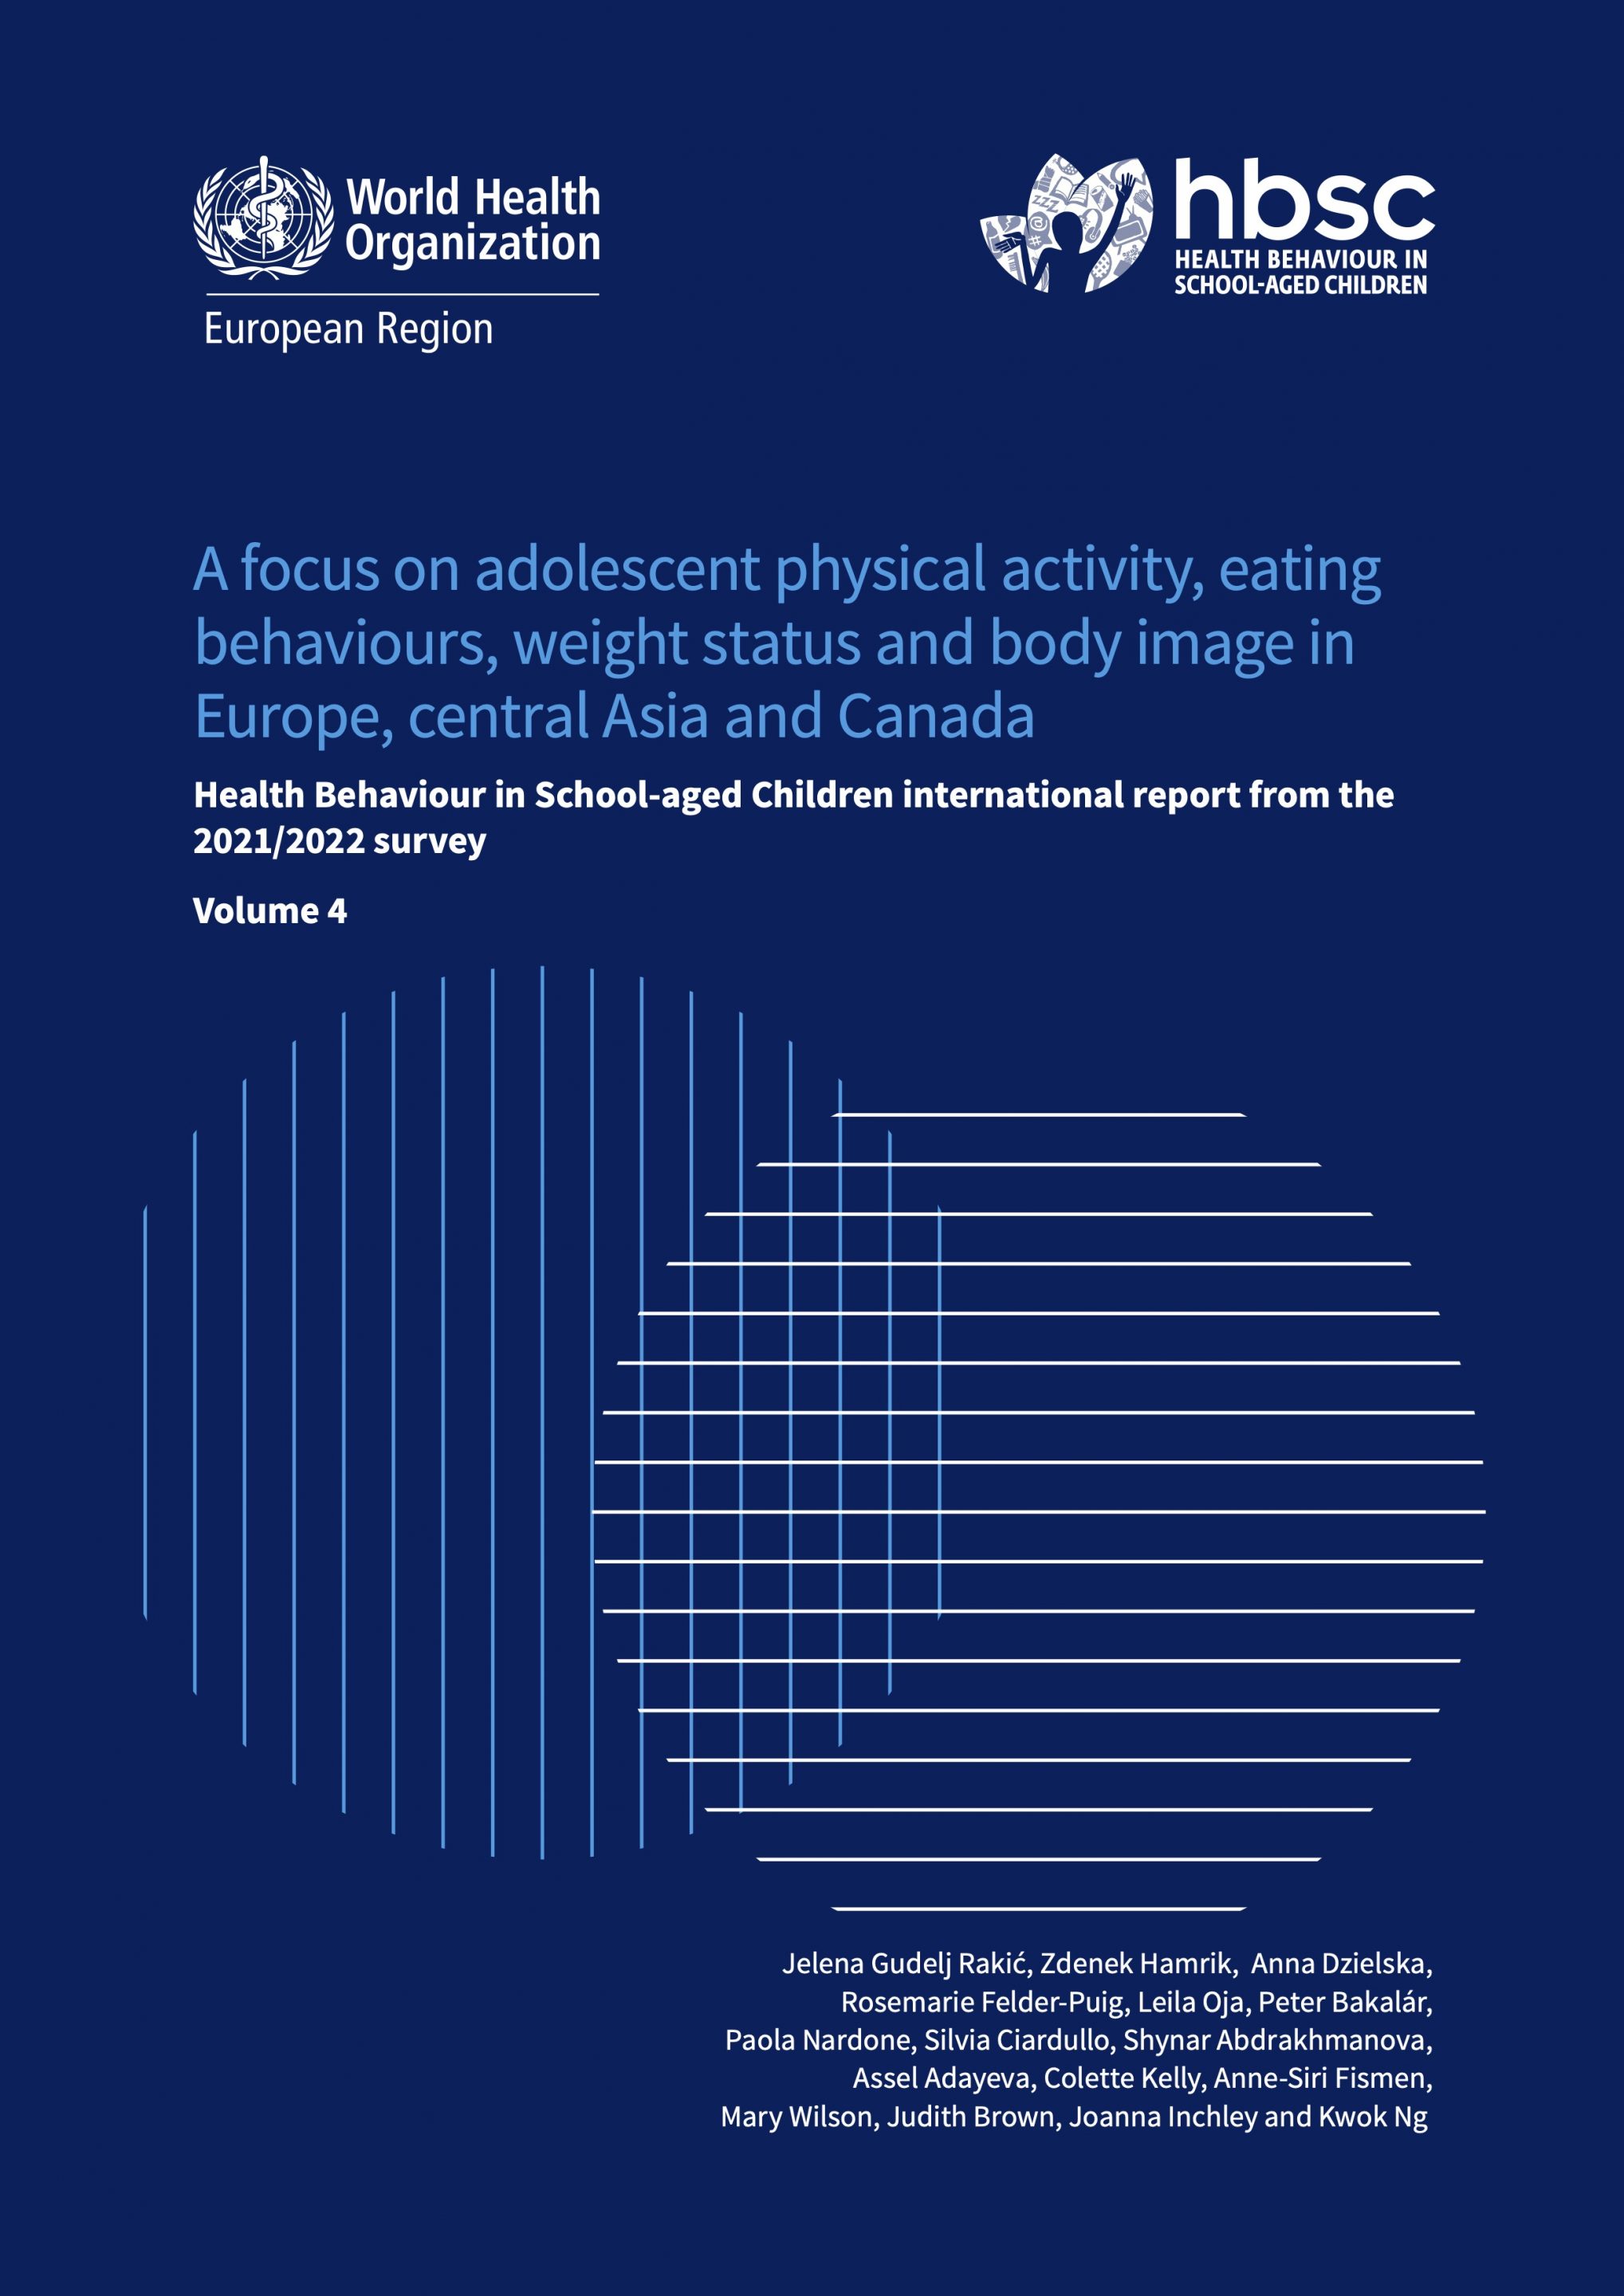 Cover image from volume 4 report on adolescent physical activity, eating behaviours, weight status and body image